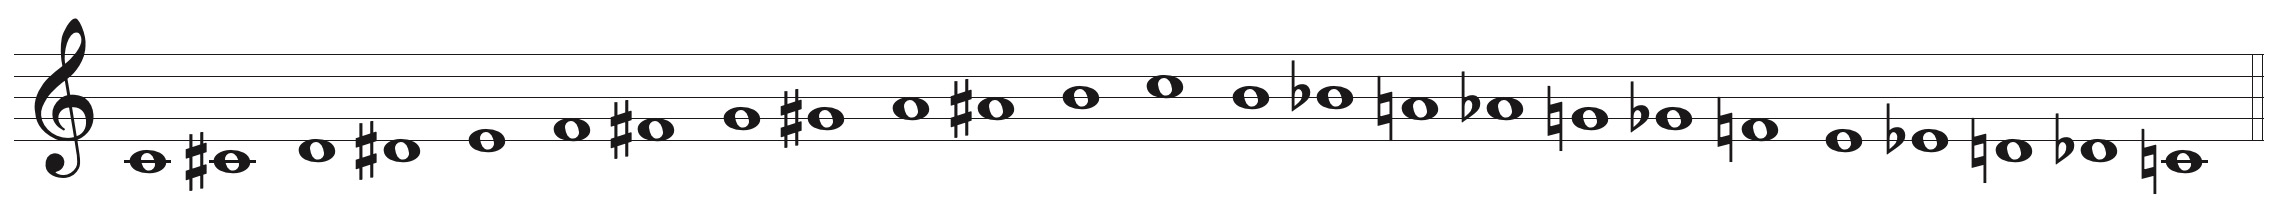 the chromatic scale